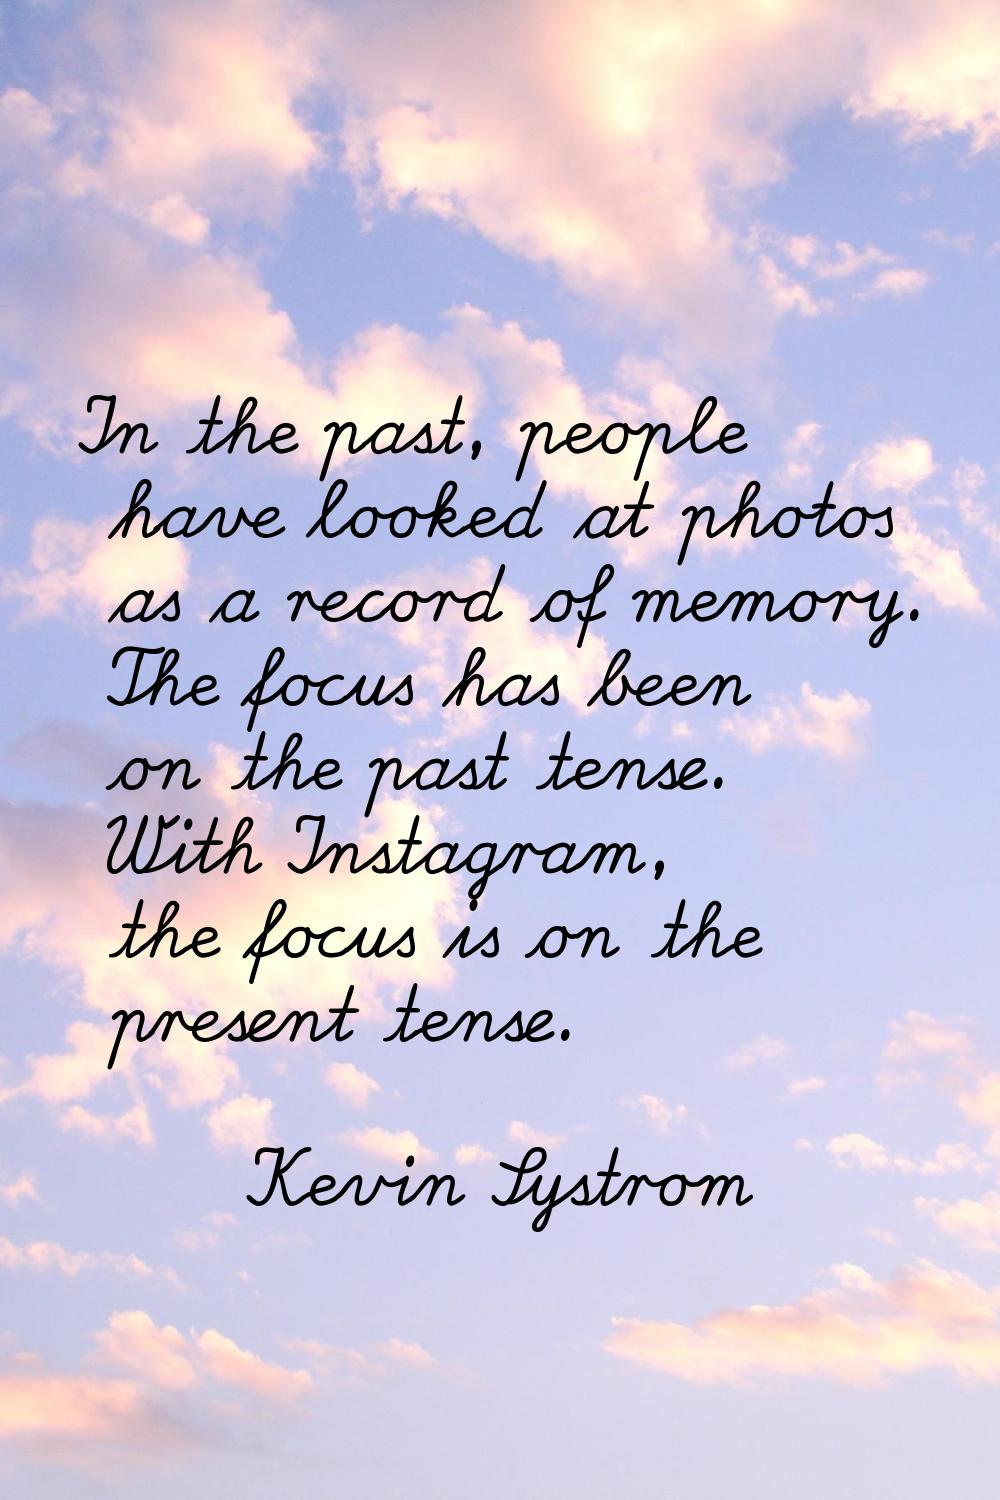 In the past, people have looked at photos as a record of memory. The focus has been on the past ten